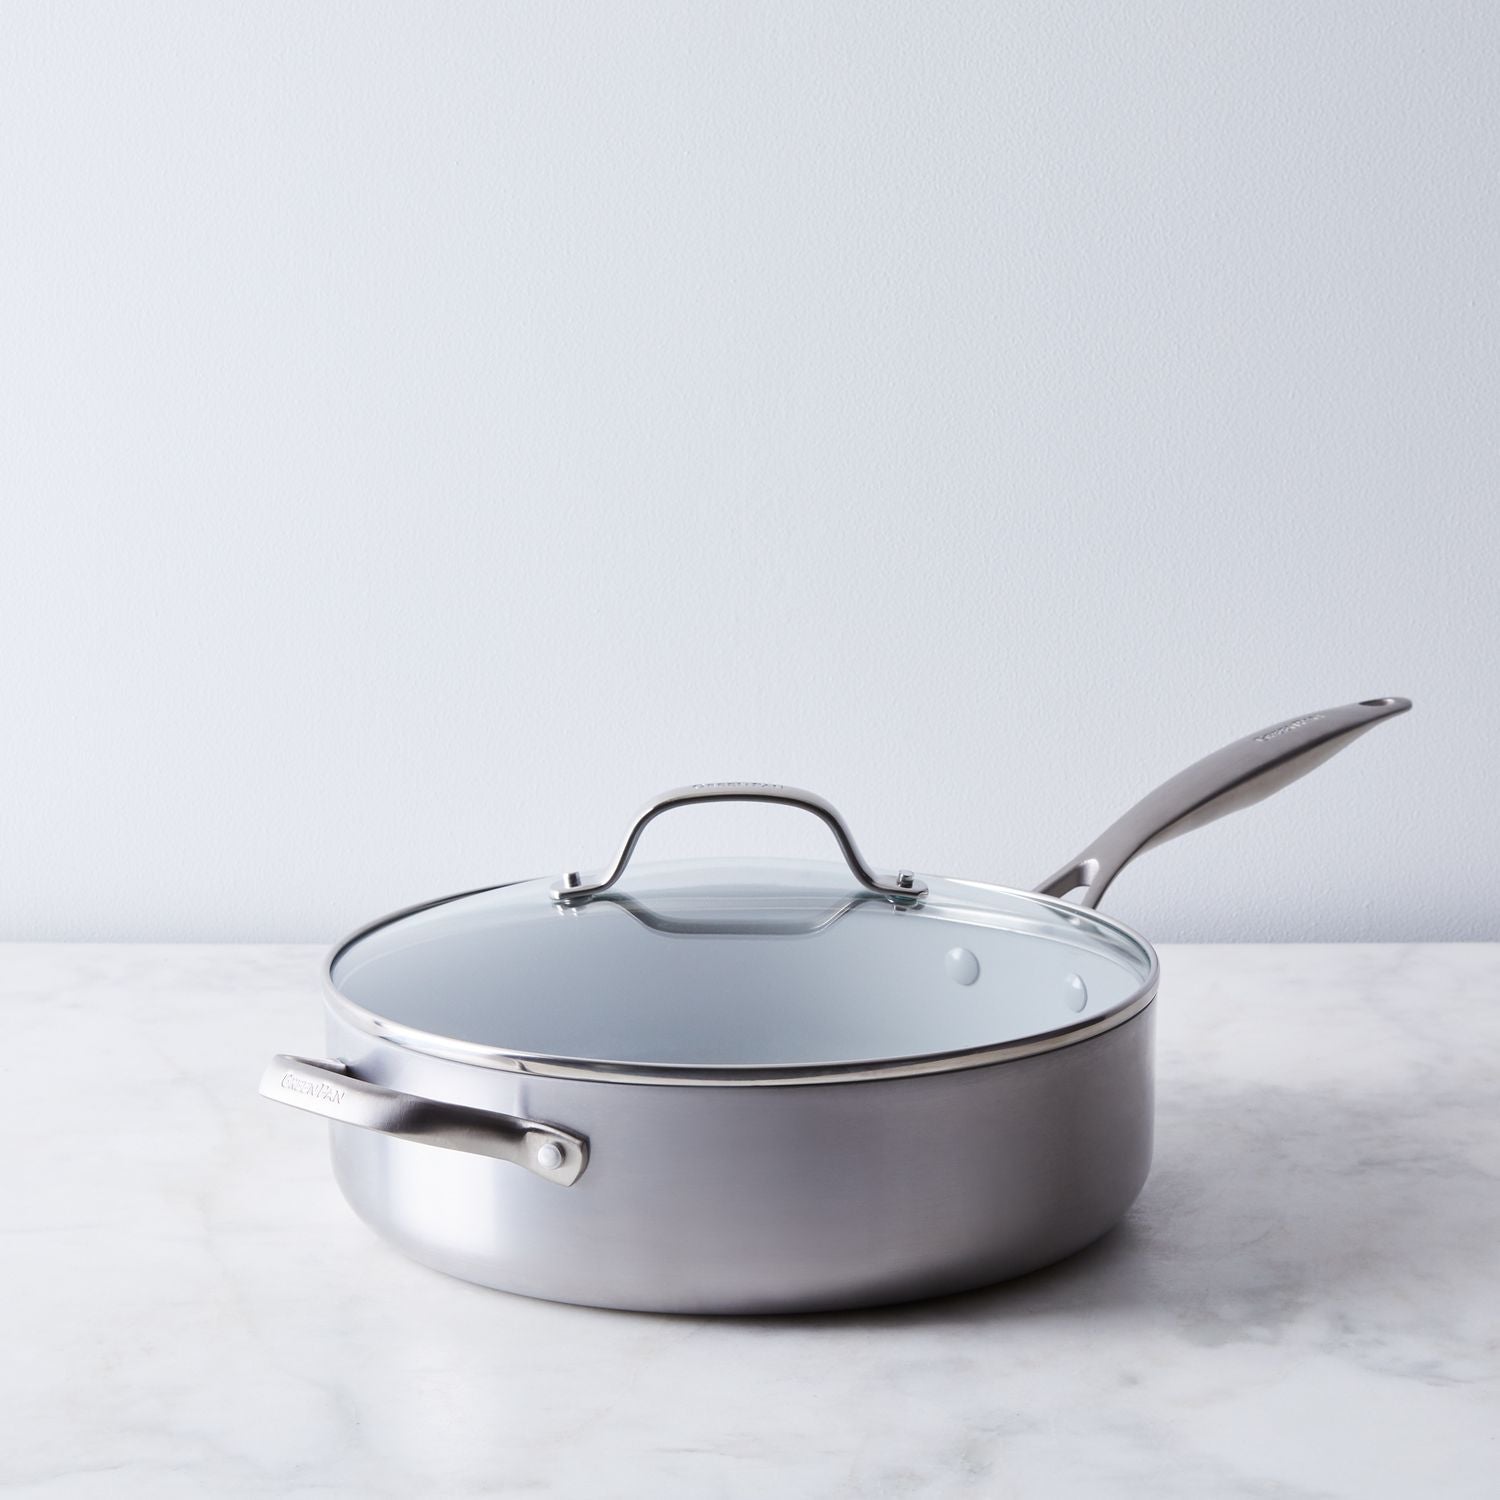 saute pan with lid on marble counter with white background.